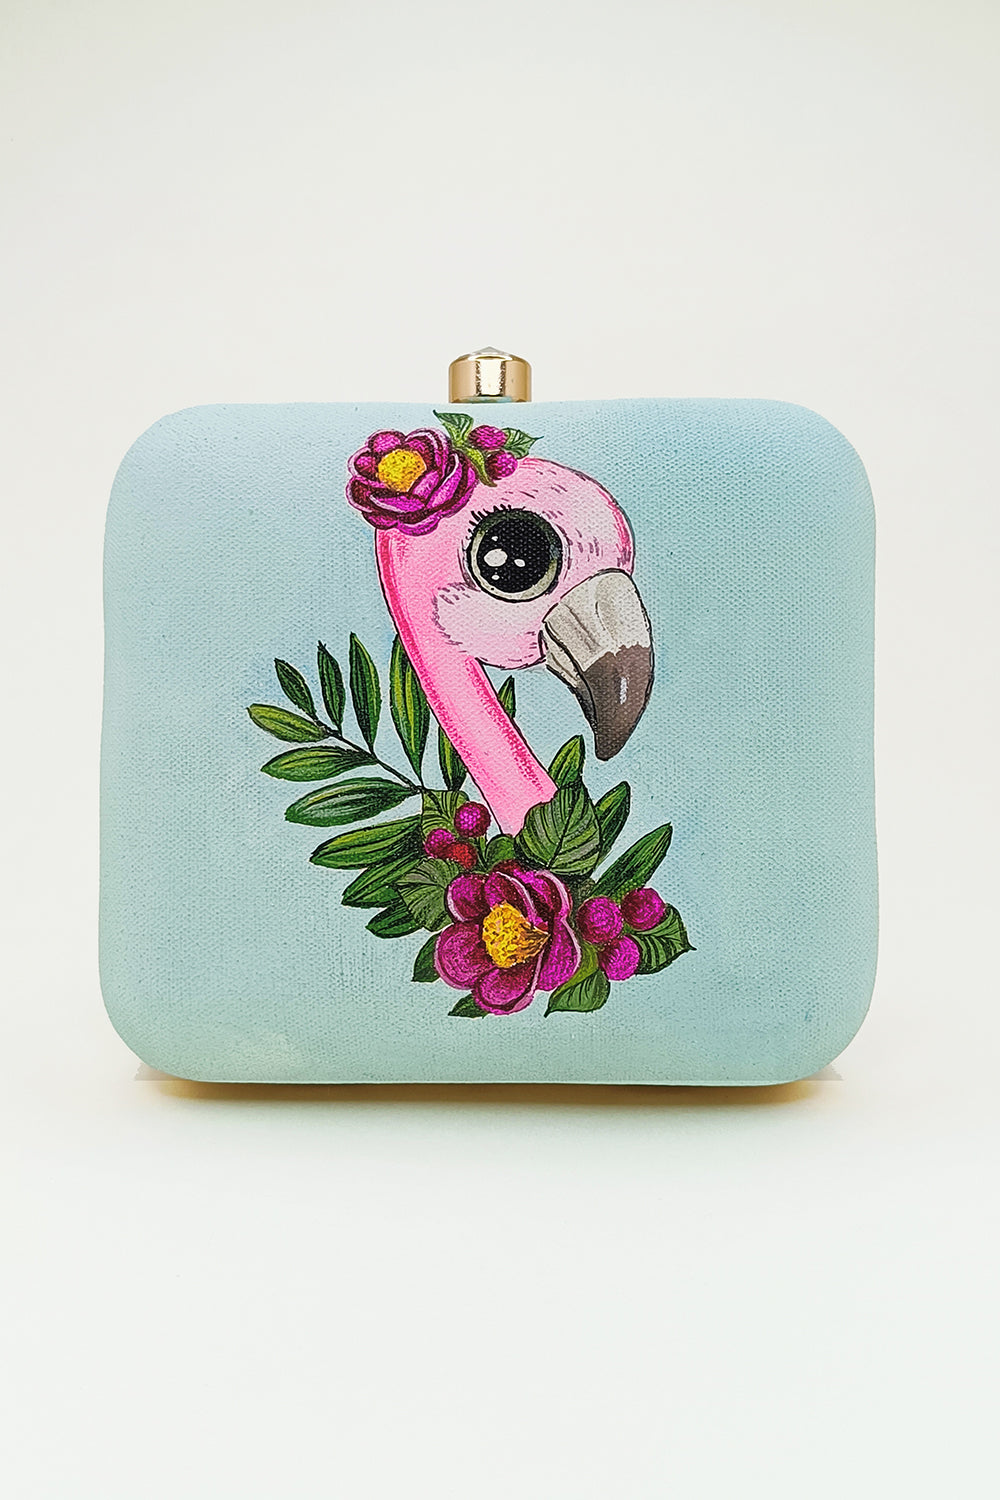 HAND PAINTED FLAMINGO CLUTCH